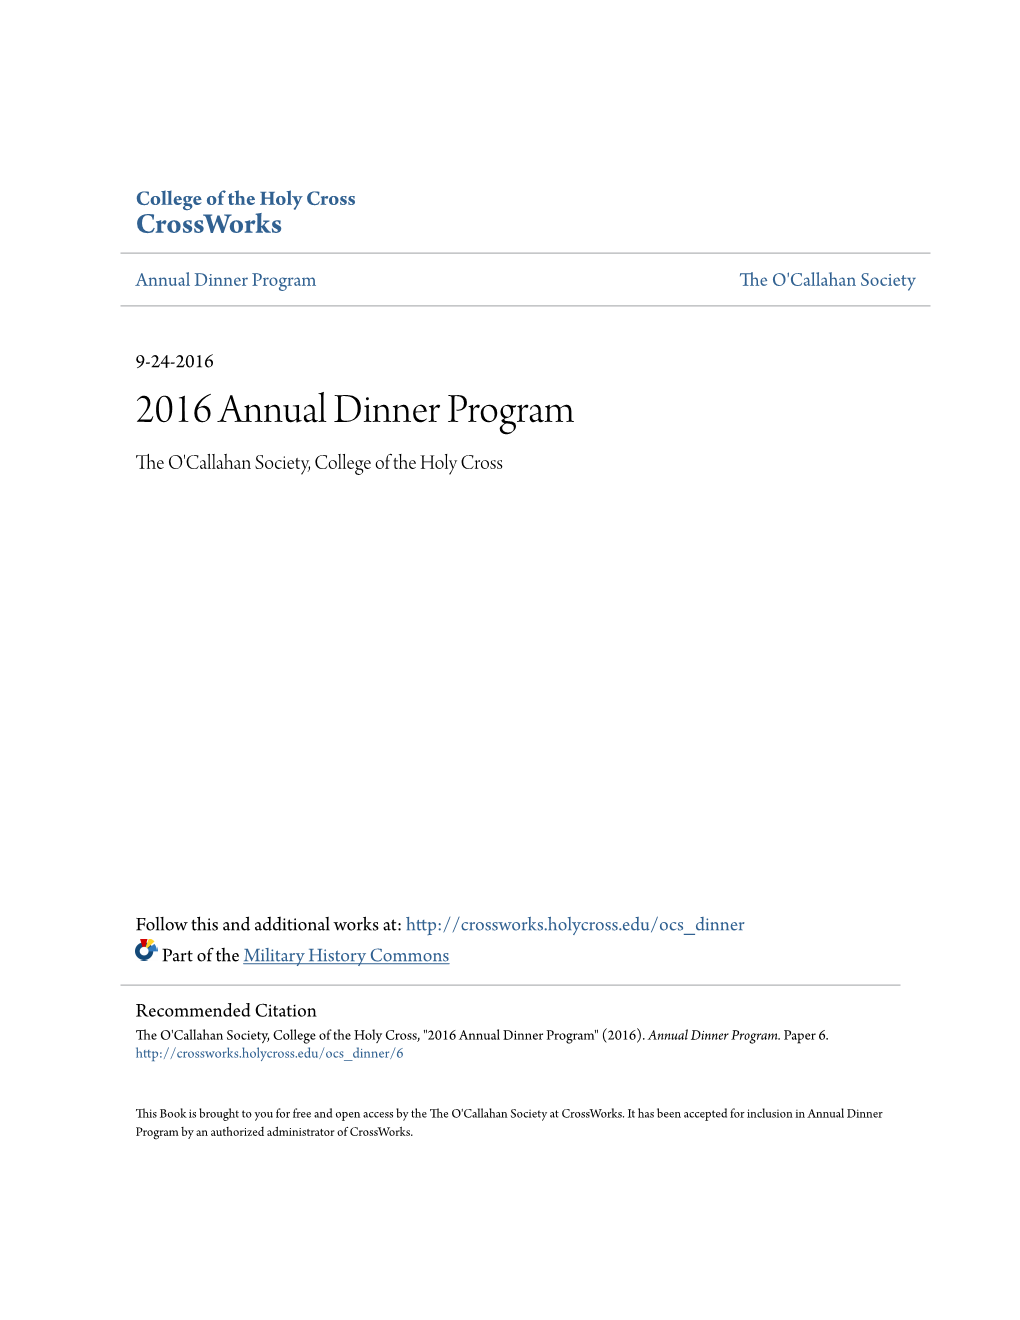 2016 Annual Dinner Program the 'Ocallahan Society, College of the Holy Cross